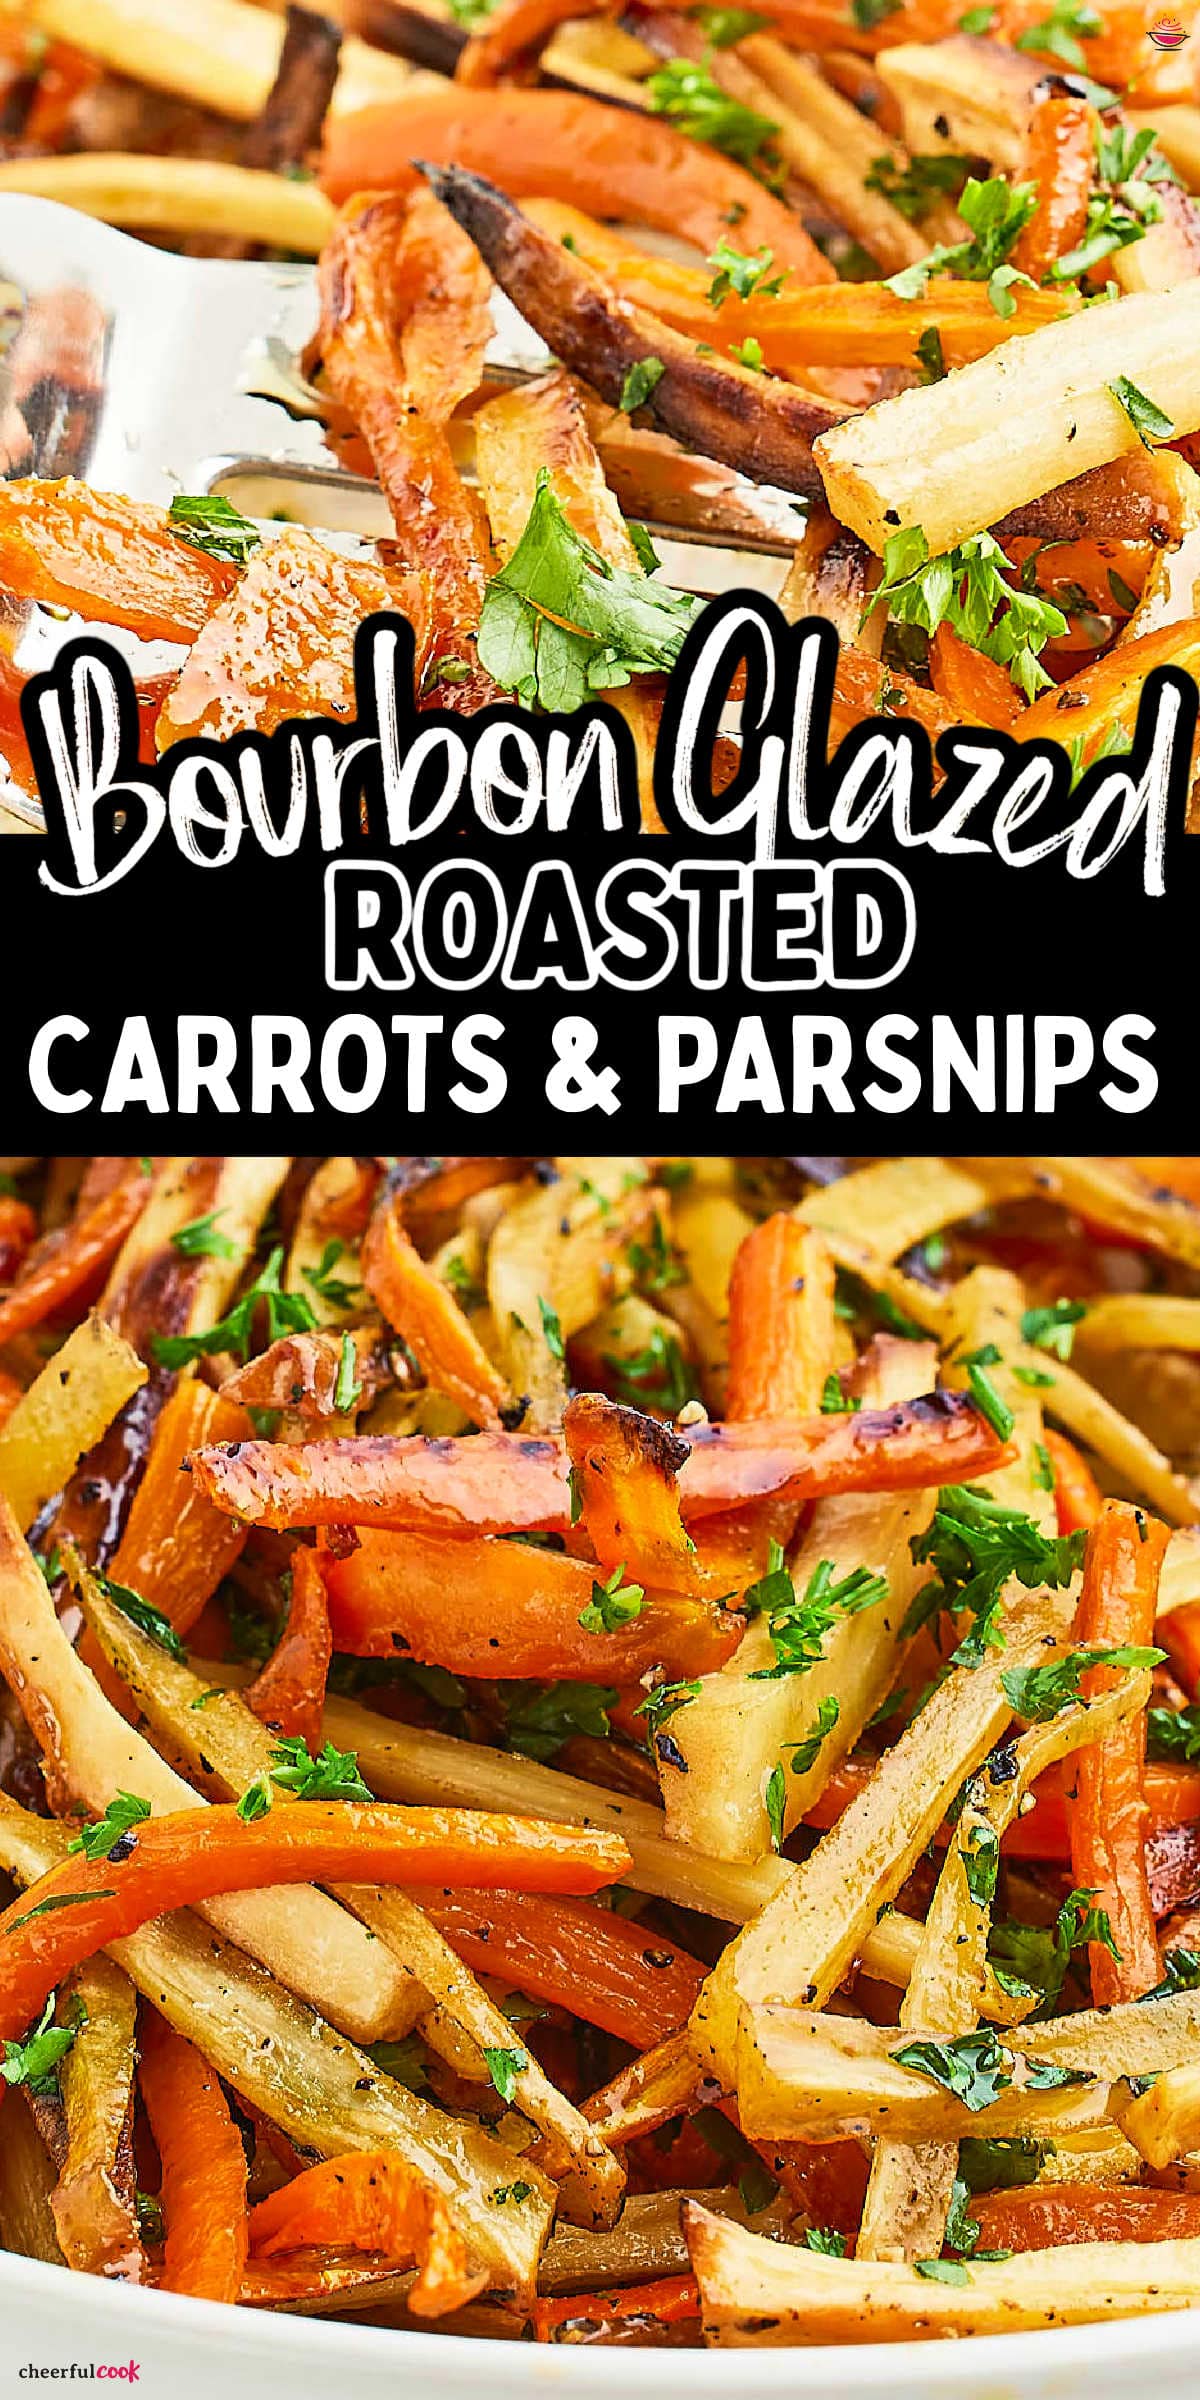 Discover the delightful combo of roasted veggies, brown sugar, and bourbon with this easy-to-follow recipe. Perfect for a homely dinner, the earthy flavors of carrots and parsnips come alive with a sweet, boozy glaze. #cheerfulcook #carrotsandparsnips #ovenroasted #roastedvegetables #vegetariansidedish #easyrecipe #ovenroastedvegetables via @cheerfulcook